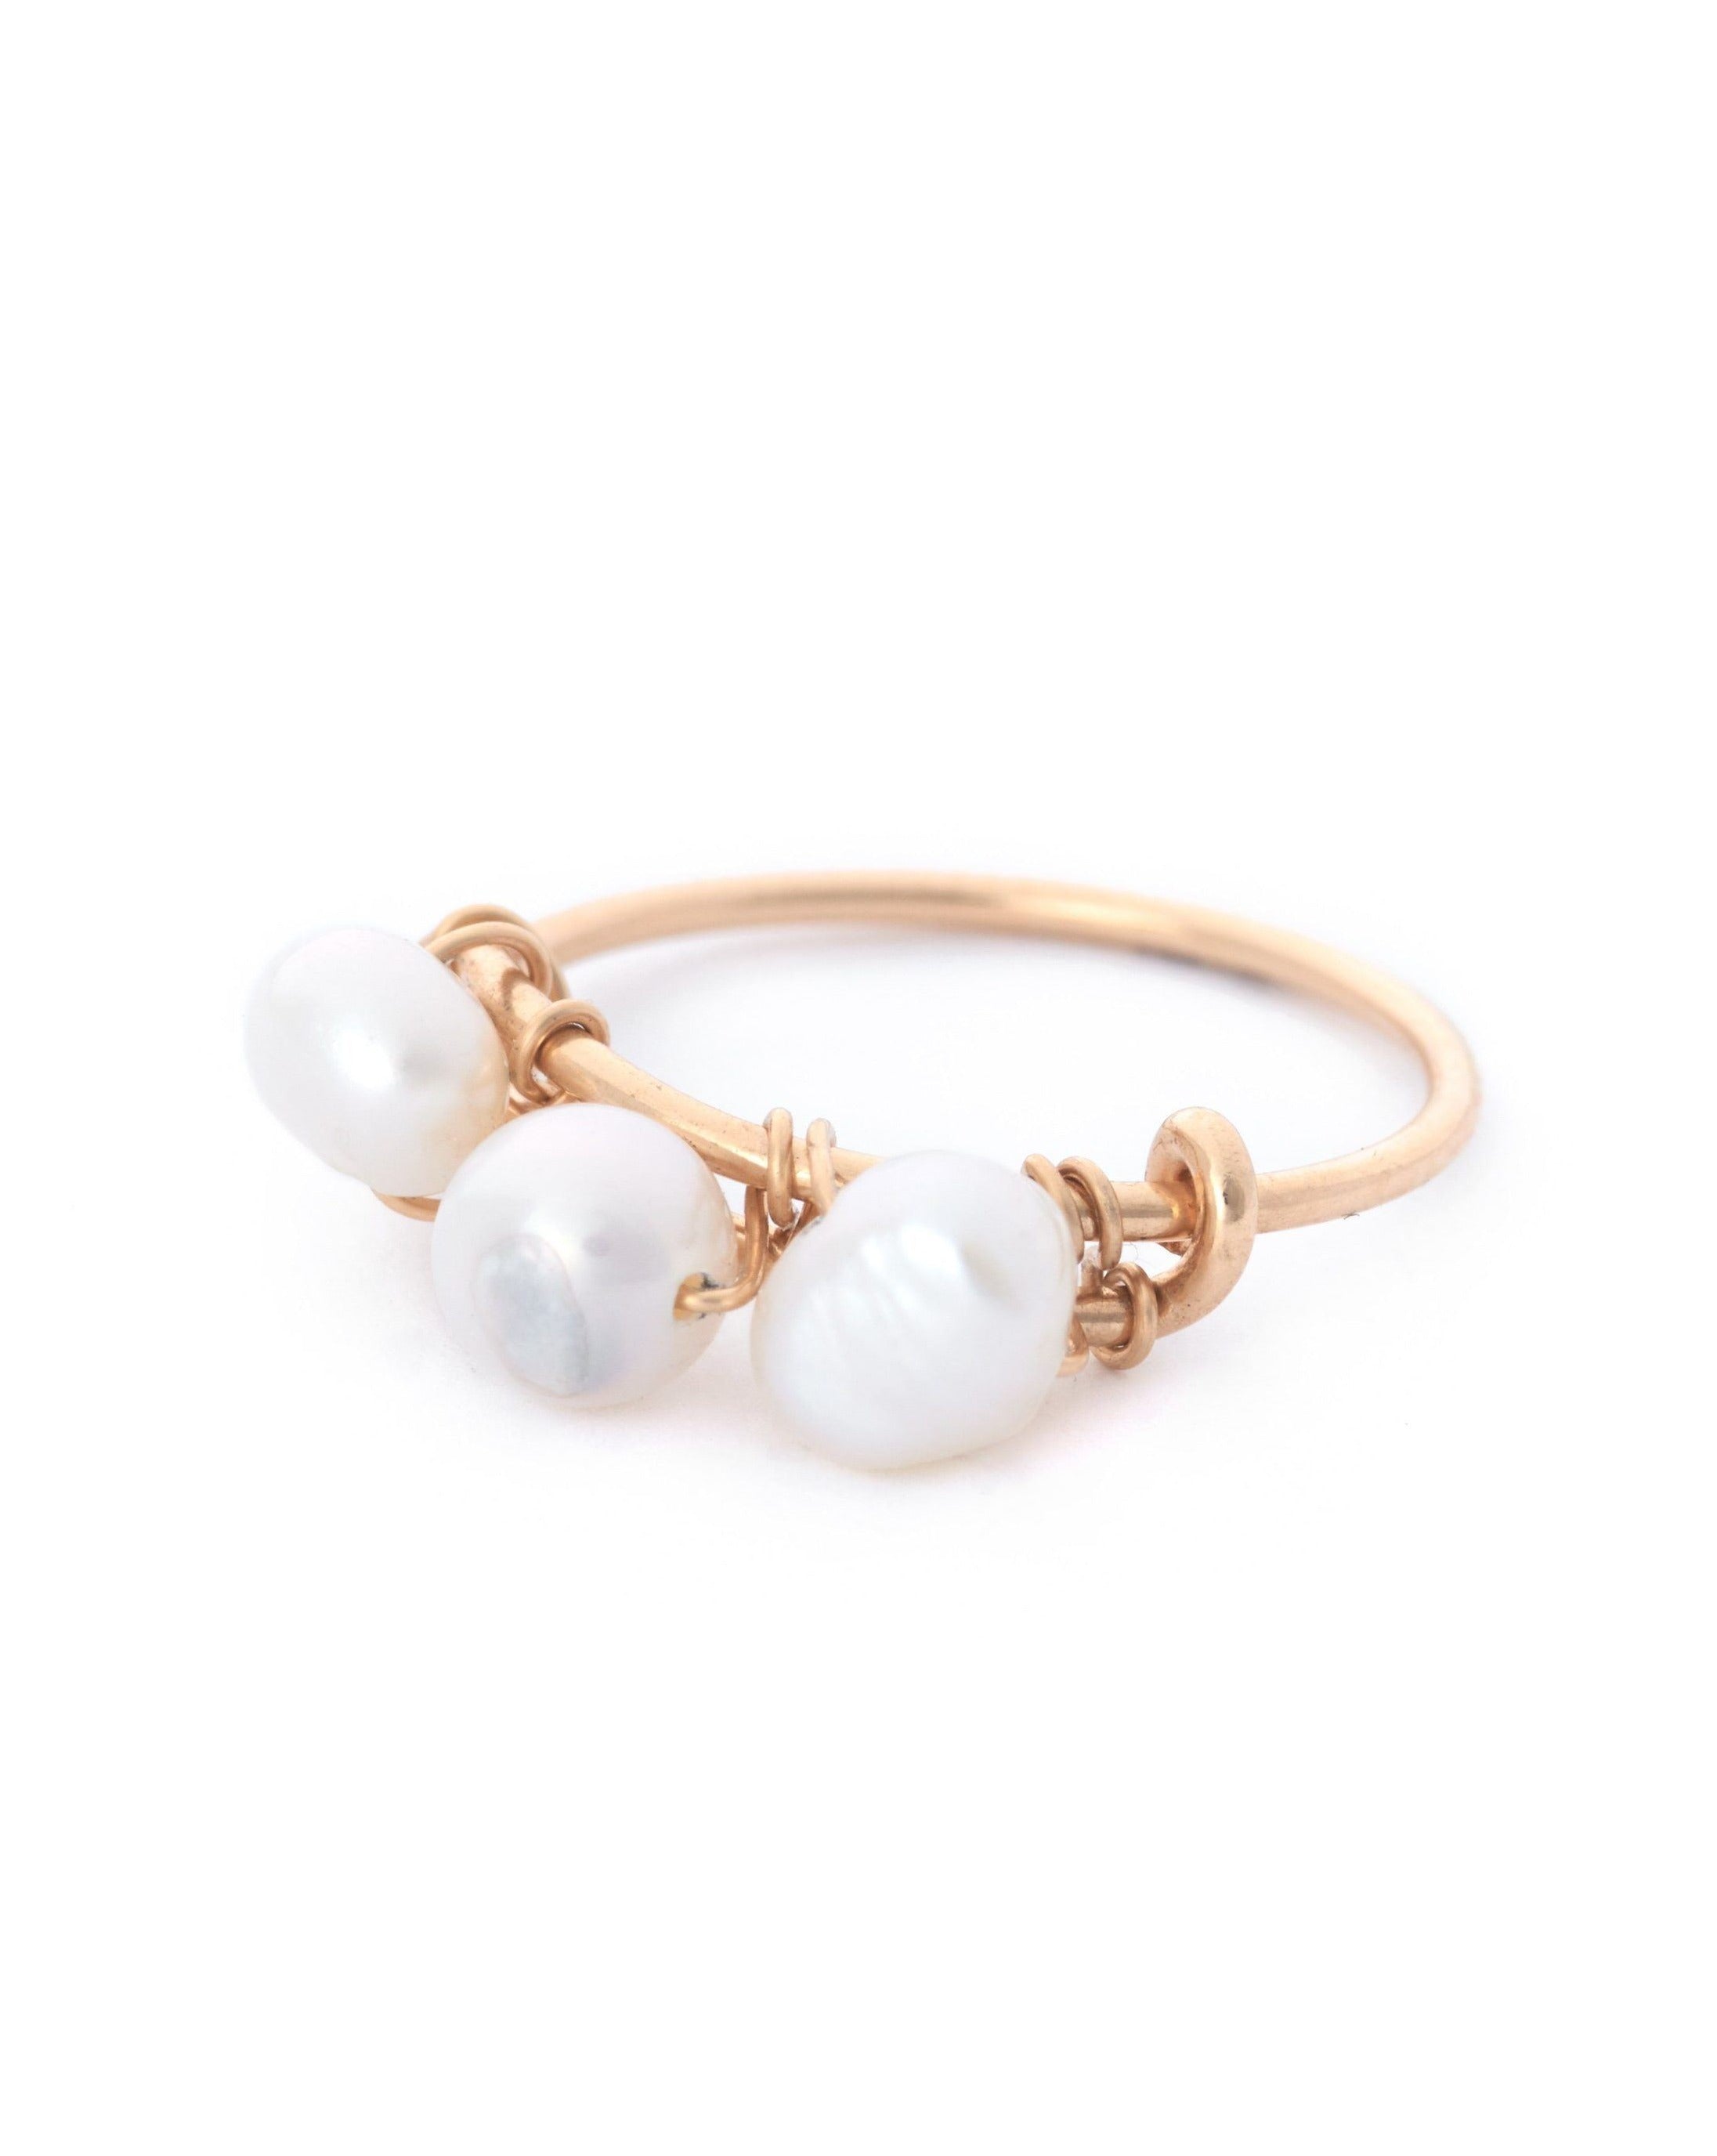 Gem Braided Ring by KOZAKH. A 1mm thick ring, crafted in 14K Gold Filled, featuring braided Pearls.